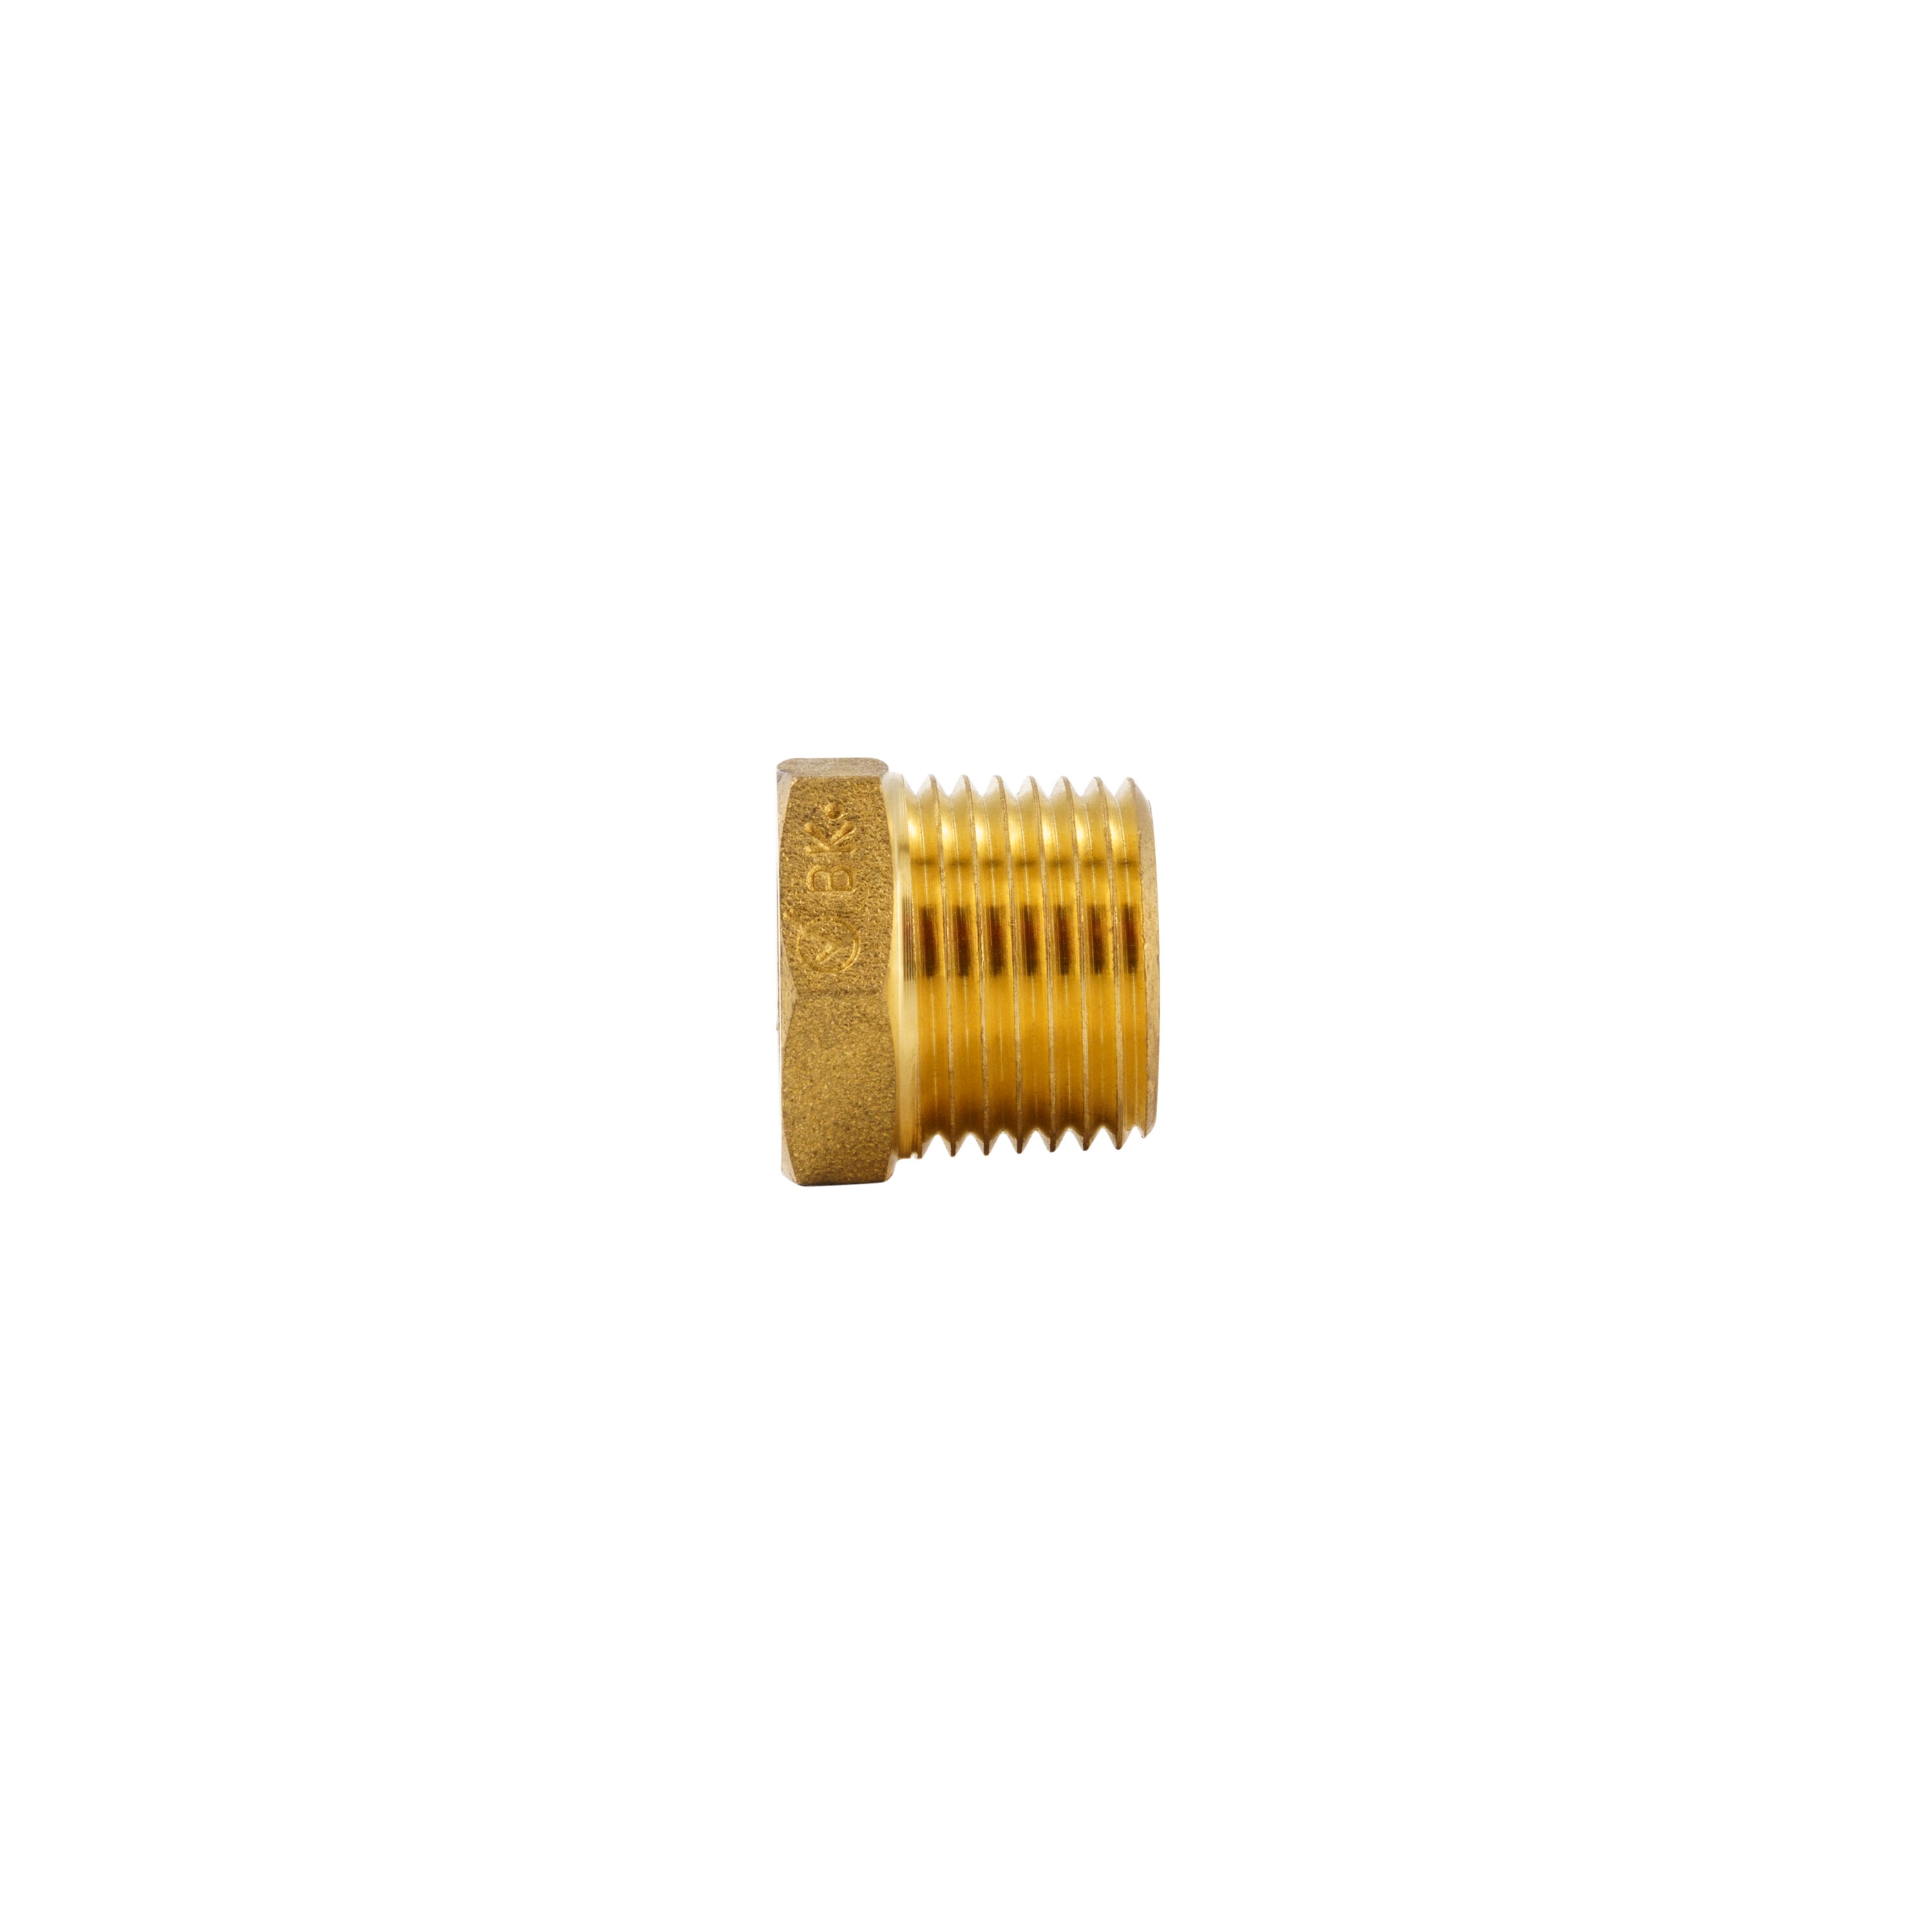 Proline Series 1/4-in x 3/8-in Compression Adapter Fitting in the Brass  Fittings department at